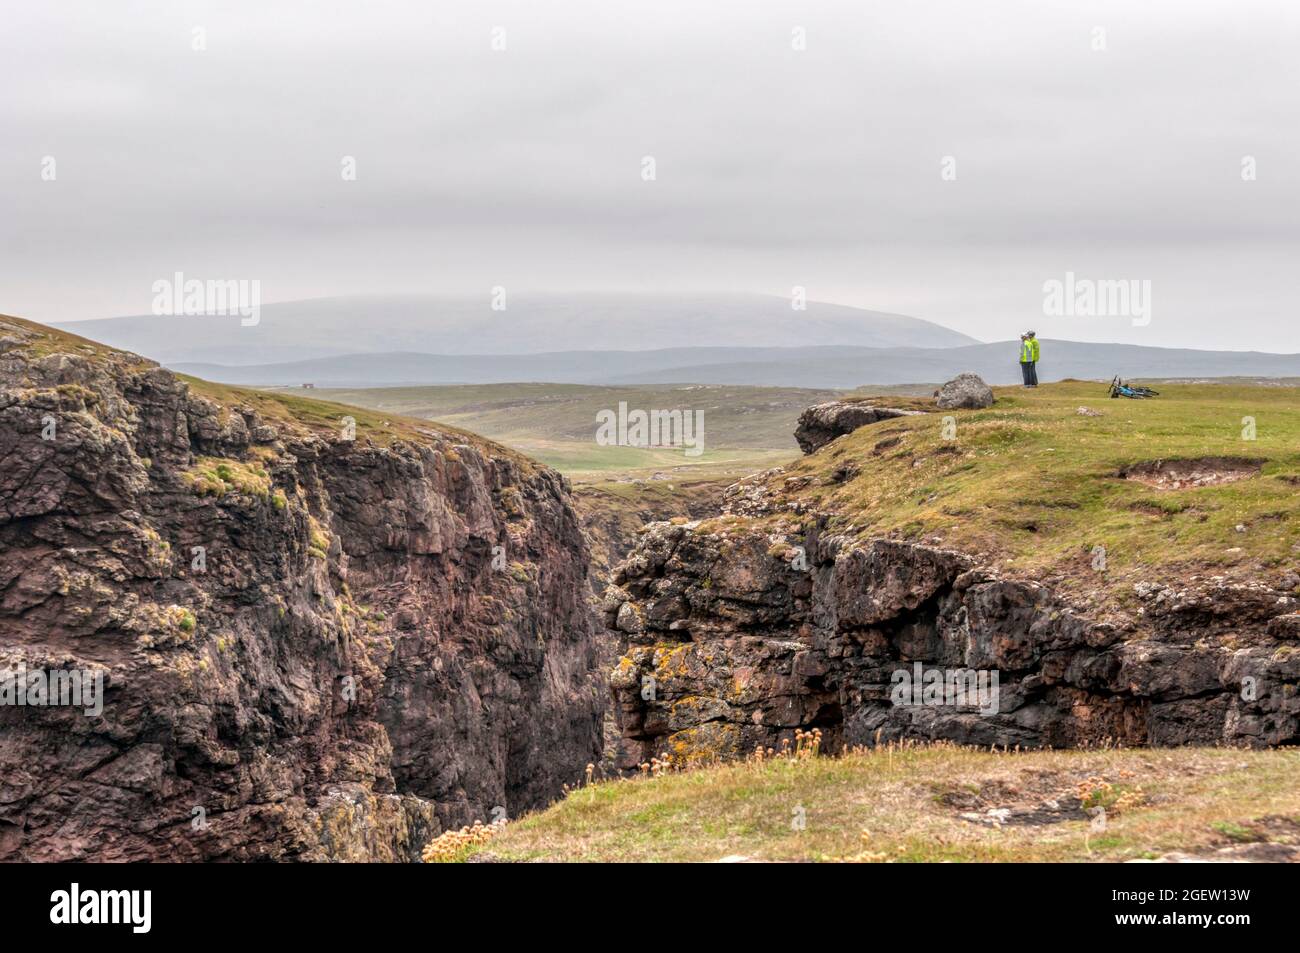 A pair of cyclists stop to admire the view at Eshaness or Esha Ness in Northmavine on Mainland Shetland. Stock Photo